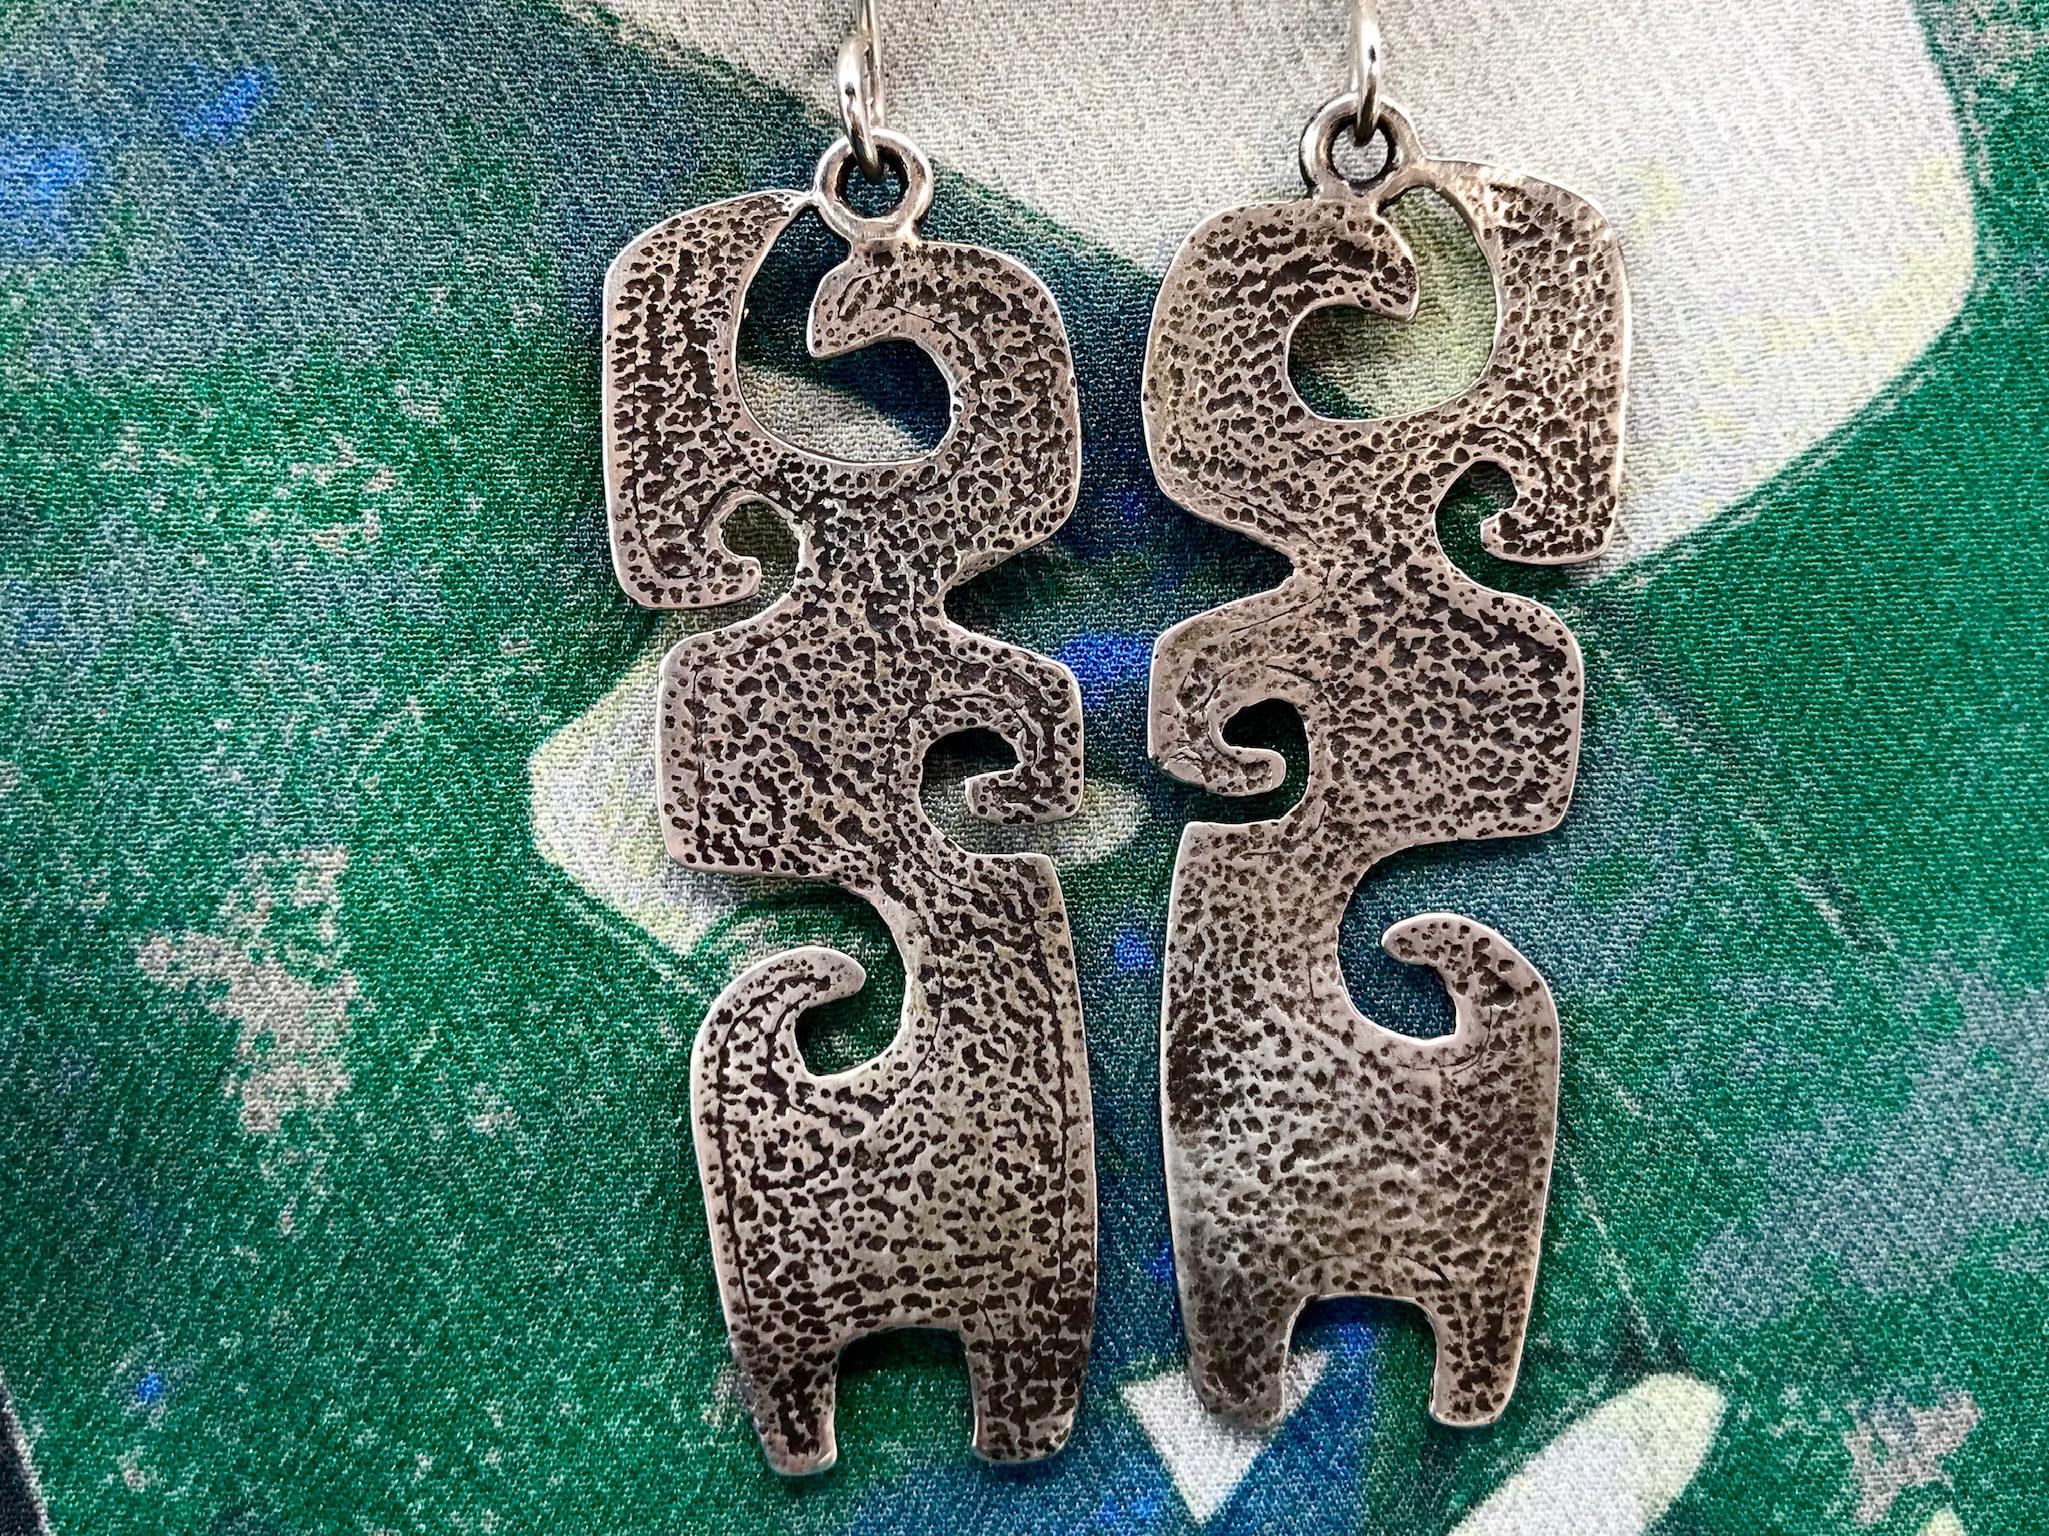 Grandchildren, cast silver earrings Melanie Yazzie contemporary Navajo designs

This is part of a series of imagery Melanie Yazzie uses in her printmaking, sculptures, and jewelry designs. The jewelry designs for Grandmother include this pendant